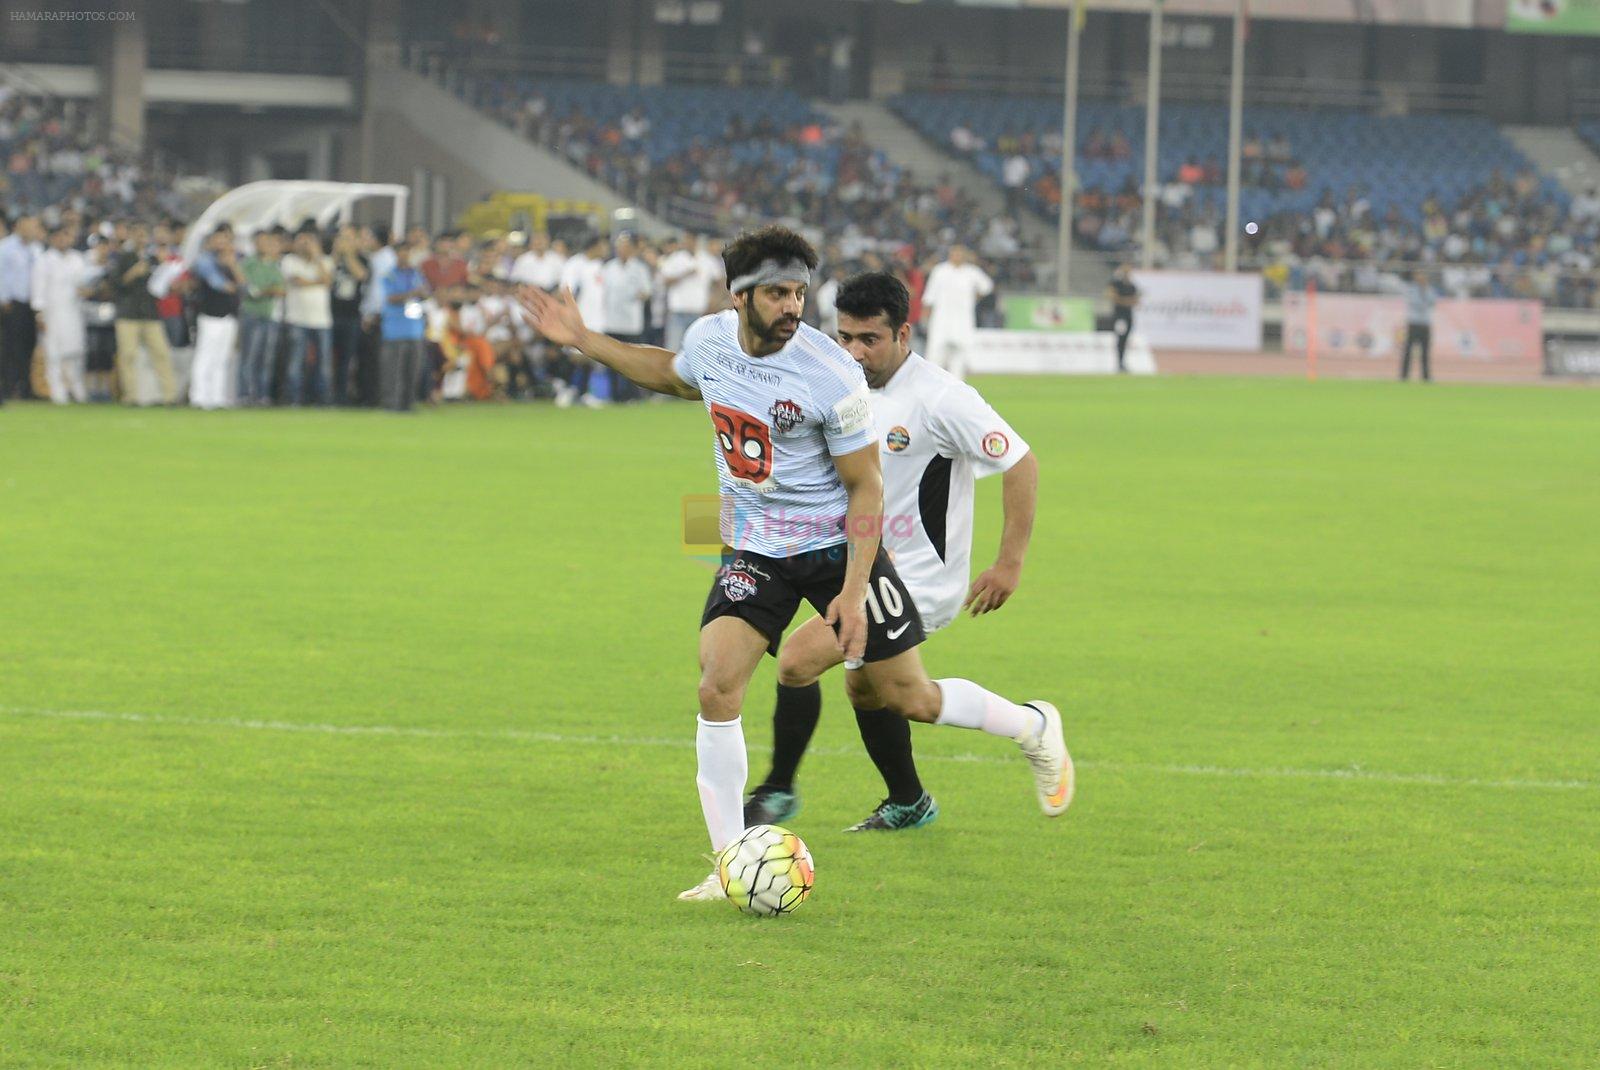 Player during Sadhbhavna Football Match between Parliamentary MP vs All Stars for the Beti Bachao, Beti Padhao, in New Delhi, India on July 24, 2016